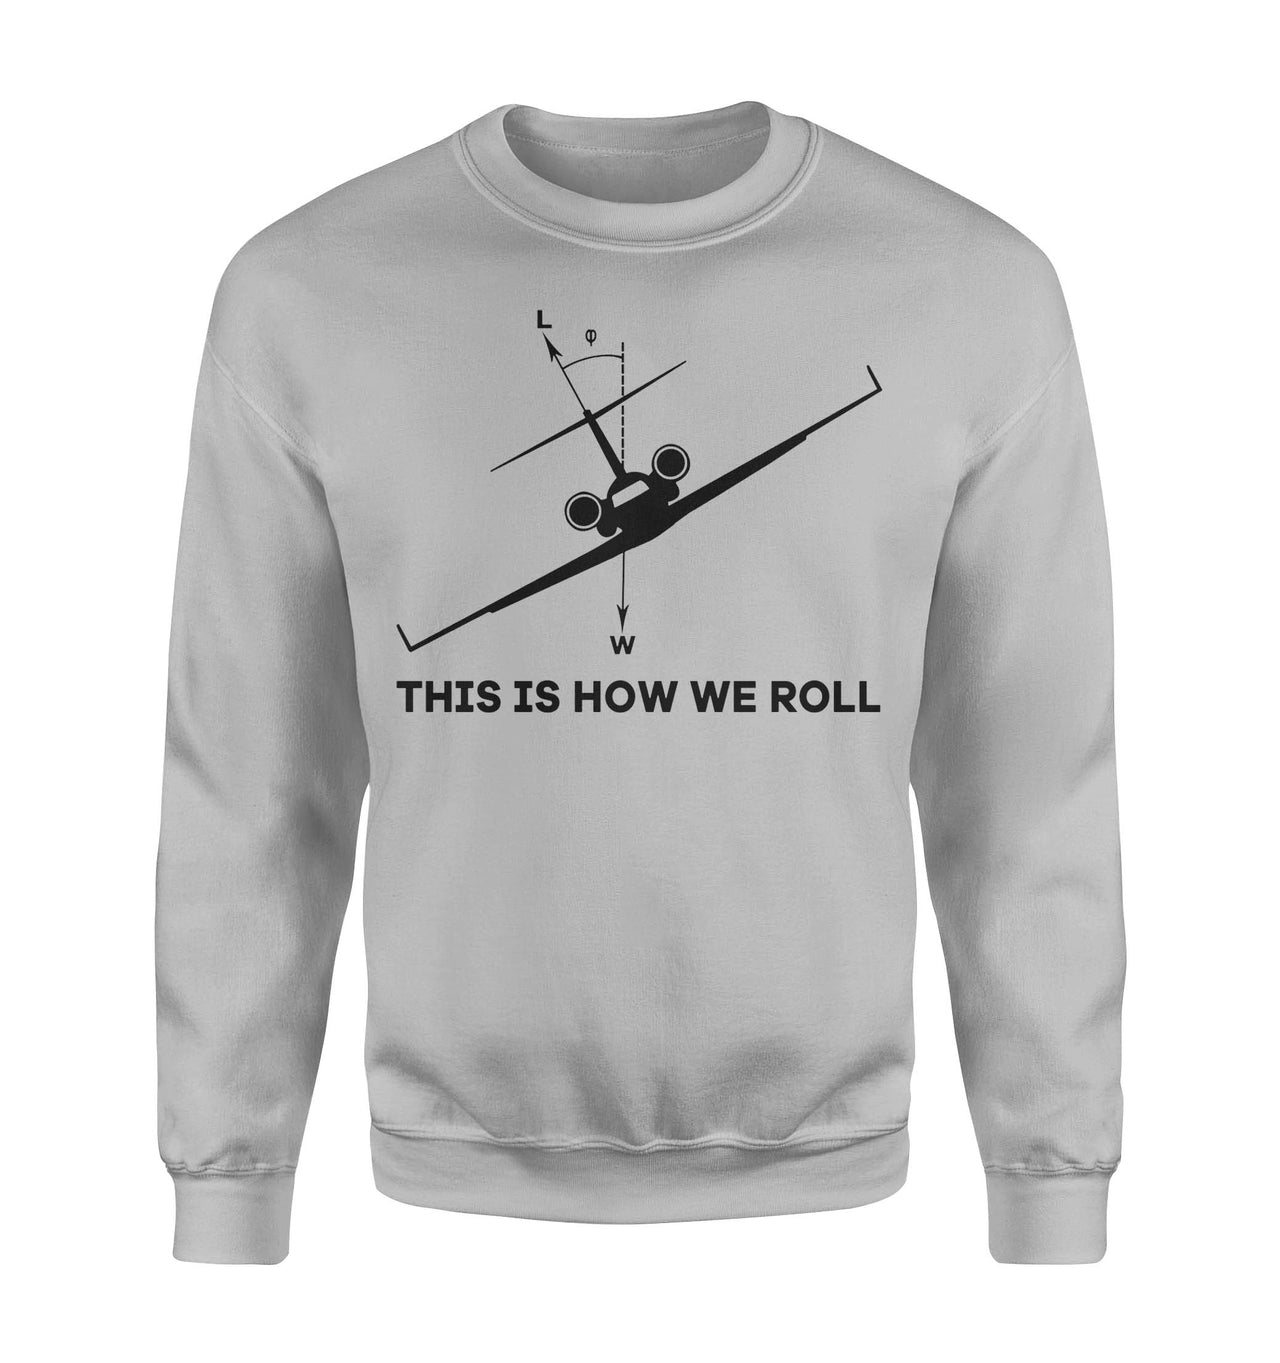 This is How We Roll Designed Sweatshirts